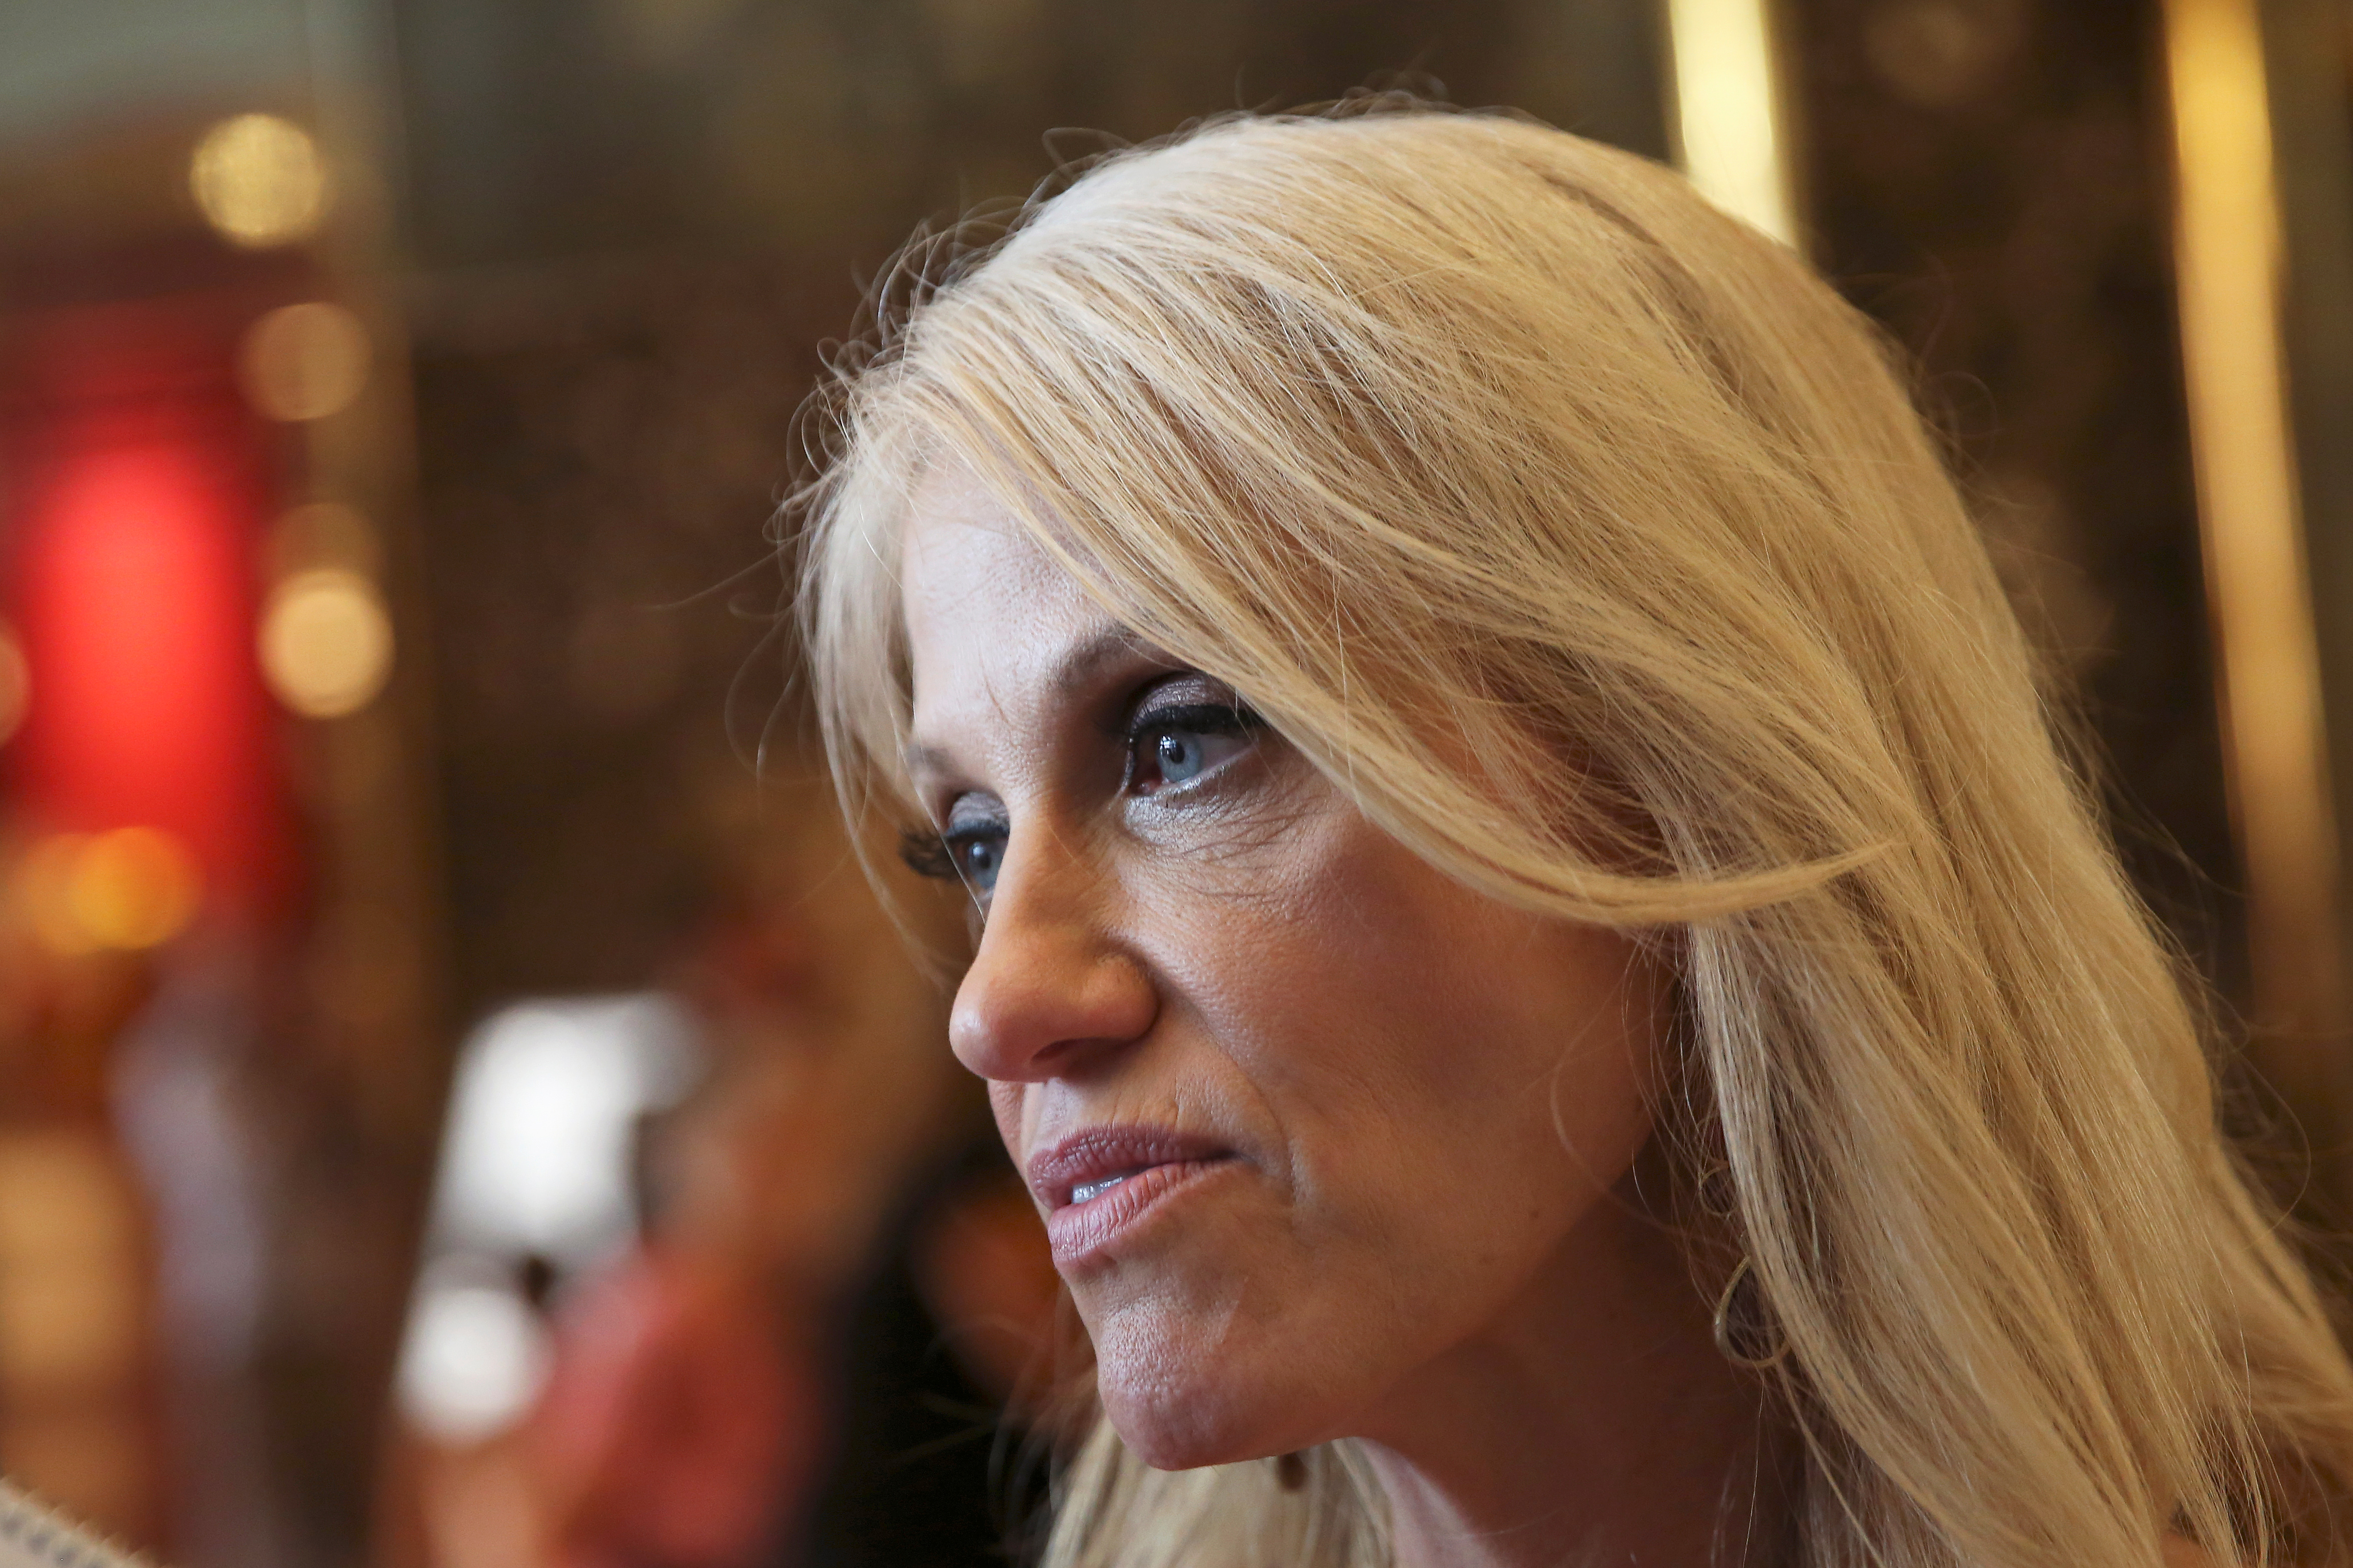 Campaign manager Kellyanne Conway for U.S. Republican presidential nominee Donald Trump speaks to the media at Trump Tower in the Manhattan borough of New York, U.S., August 17, 2016. (Carlo Allegri—Reuters)